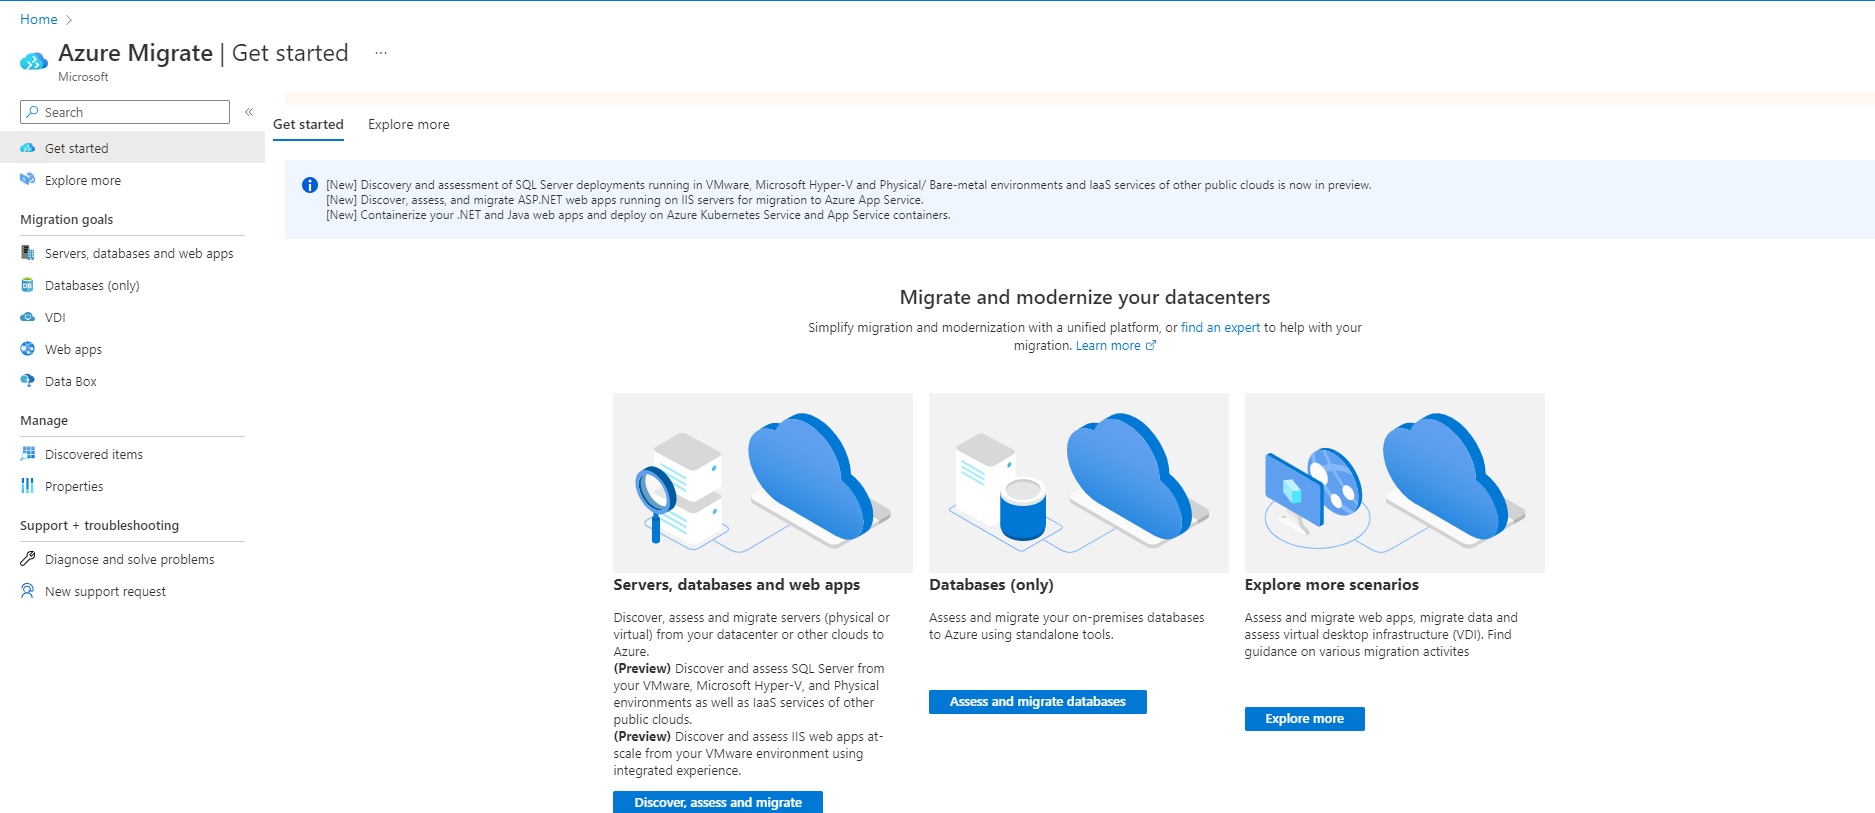 Screenshot of the Get started screen of Azure Migrate.